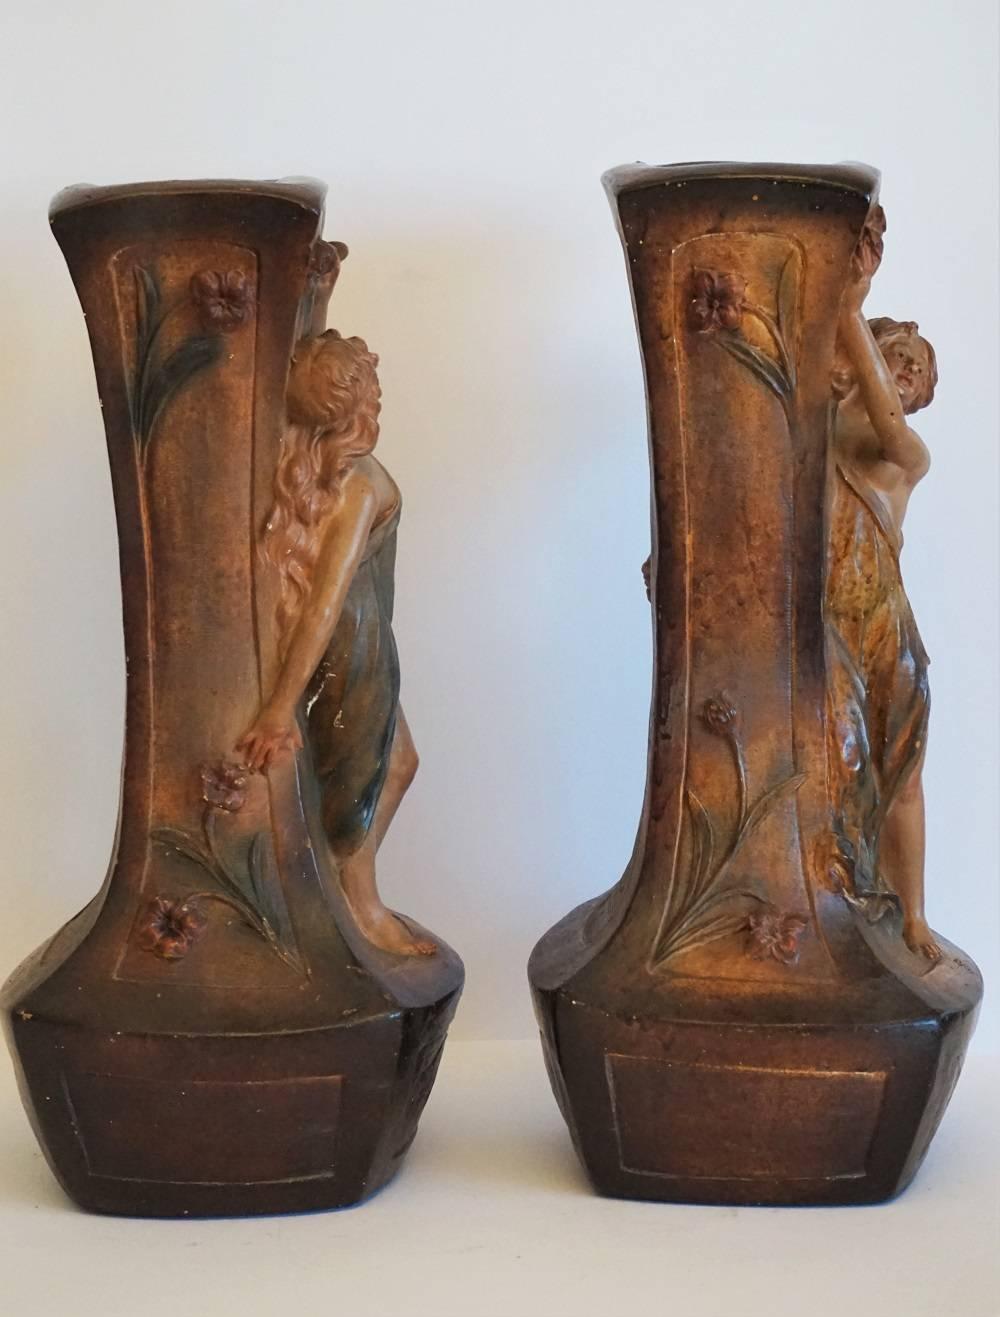 A stunning French Art Nouveau pair of large vases with female figures of the era, signed by the Parisian Sculptor F. Citti, Paris 1900-1910.

Measures:
Height 19 in (48 cm)
Width 7.25 in (18 cm)
Depth 7.25 in (18 cm).

The entire vases are in